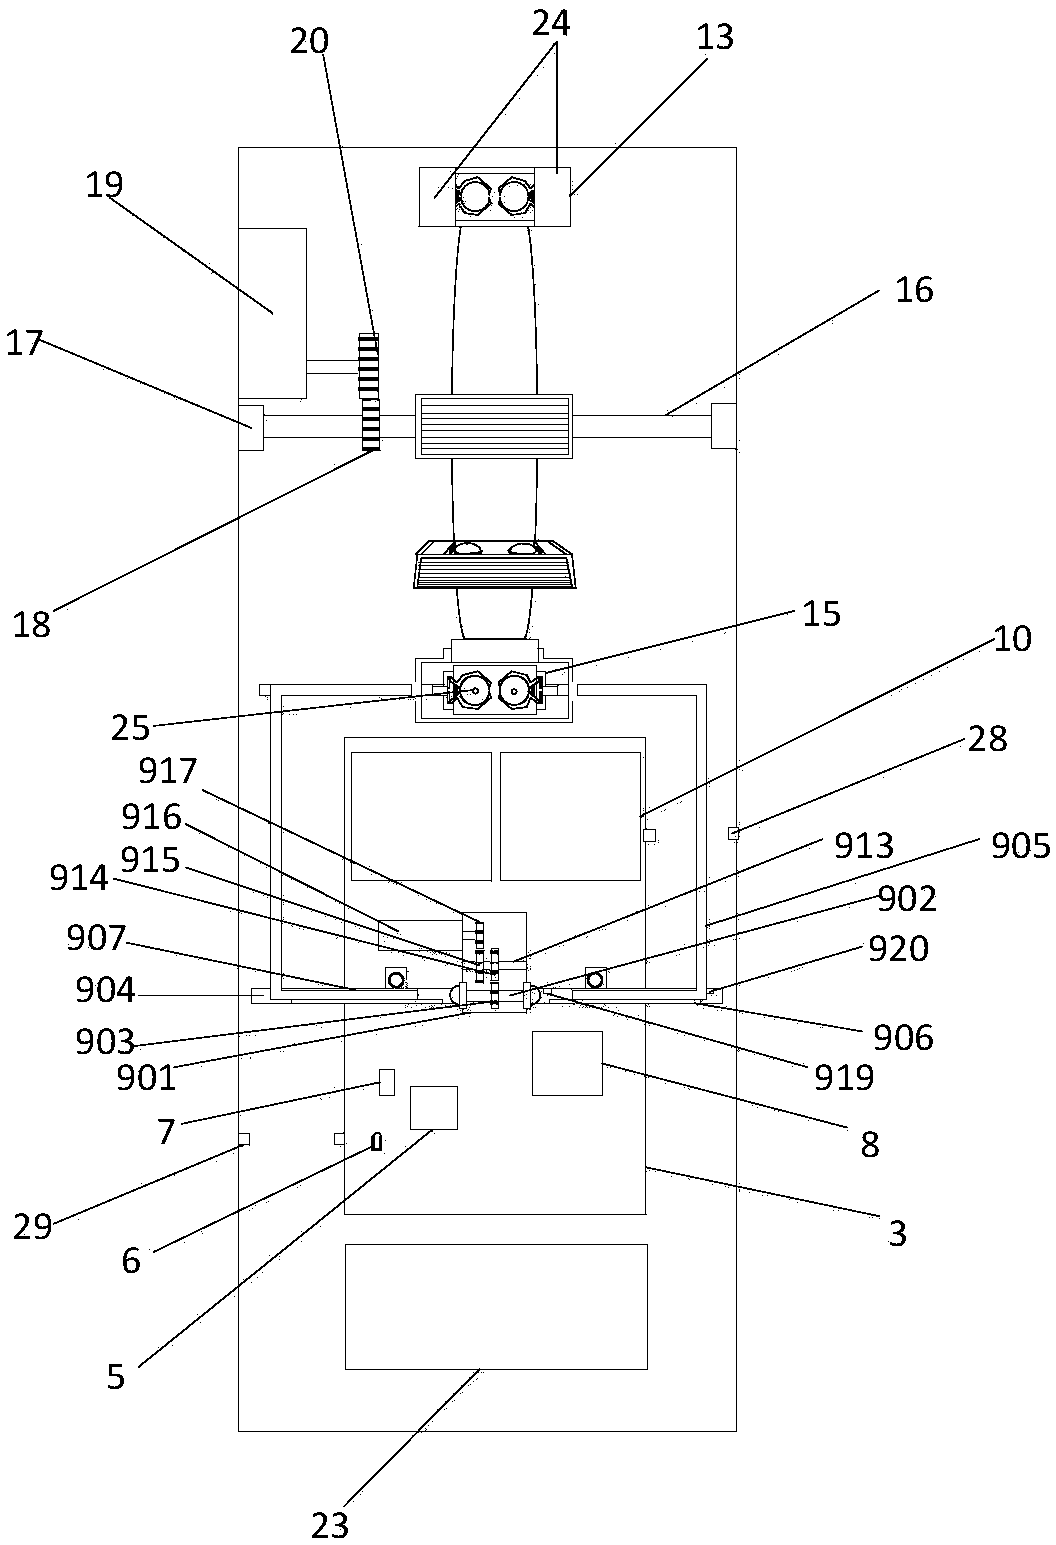 Method and apparatus for discharge direction detection and treatment of wastewater